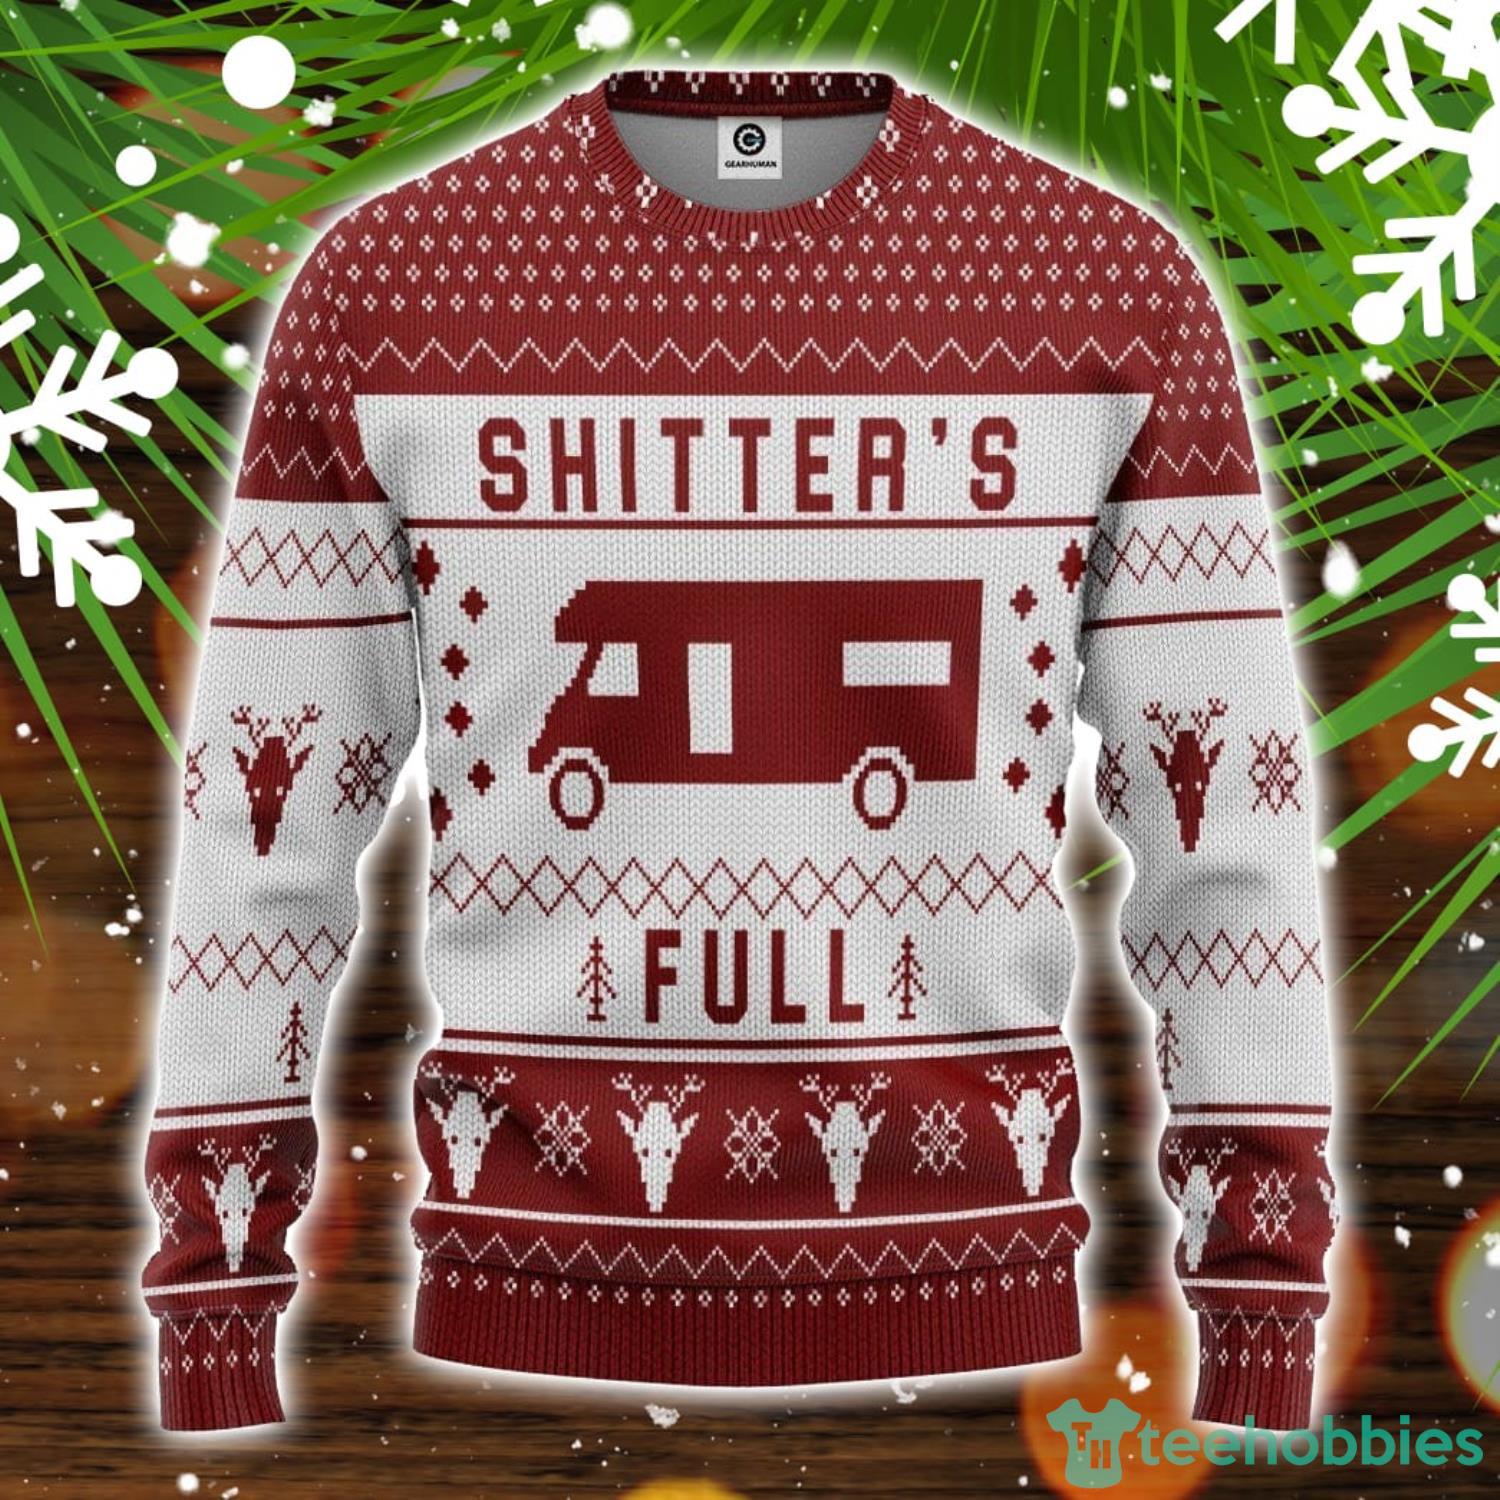 3D Shitters Full Ugly Christmas Sweater Christmas Holiday Gift Product Photo 1